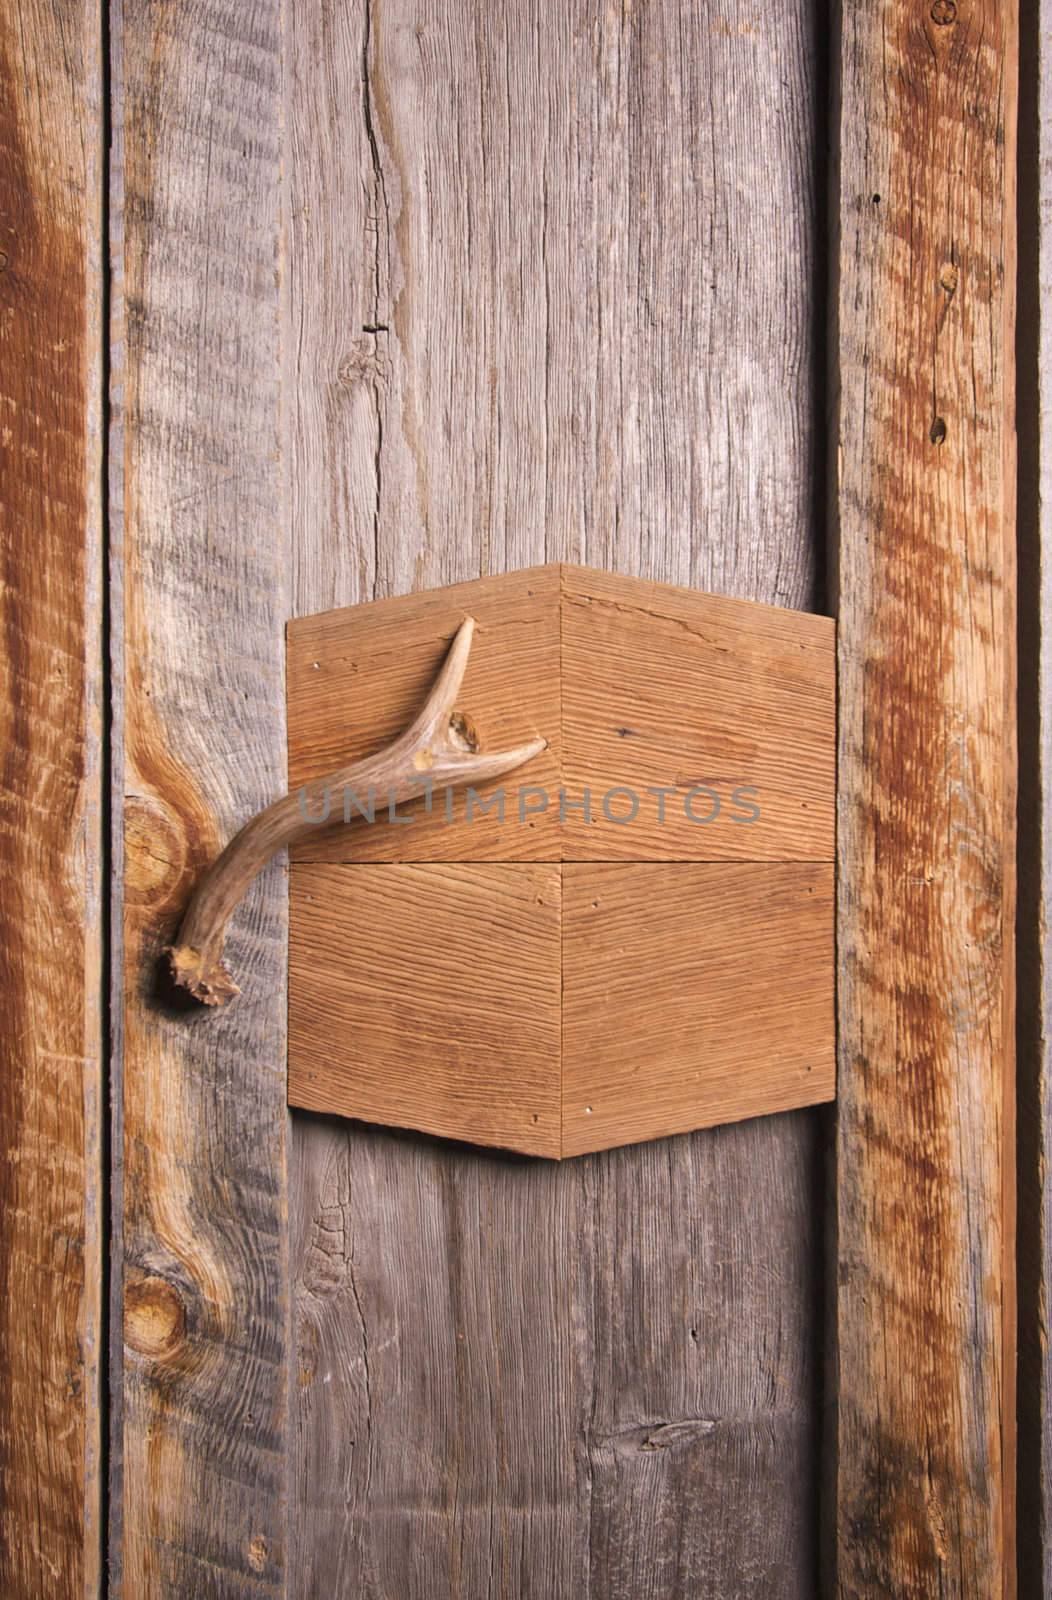 Rustic Cabinet with Antler Handle by Feverpitched